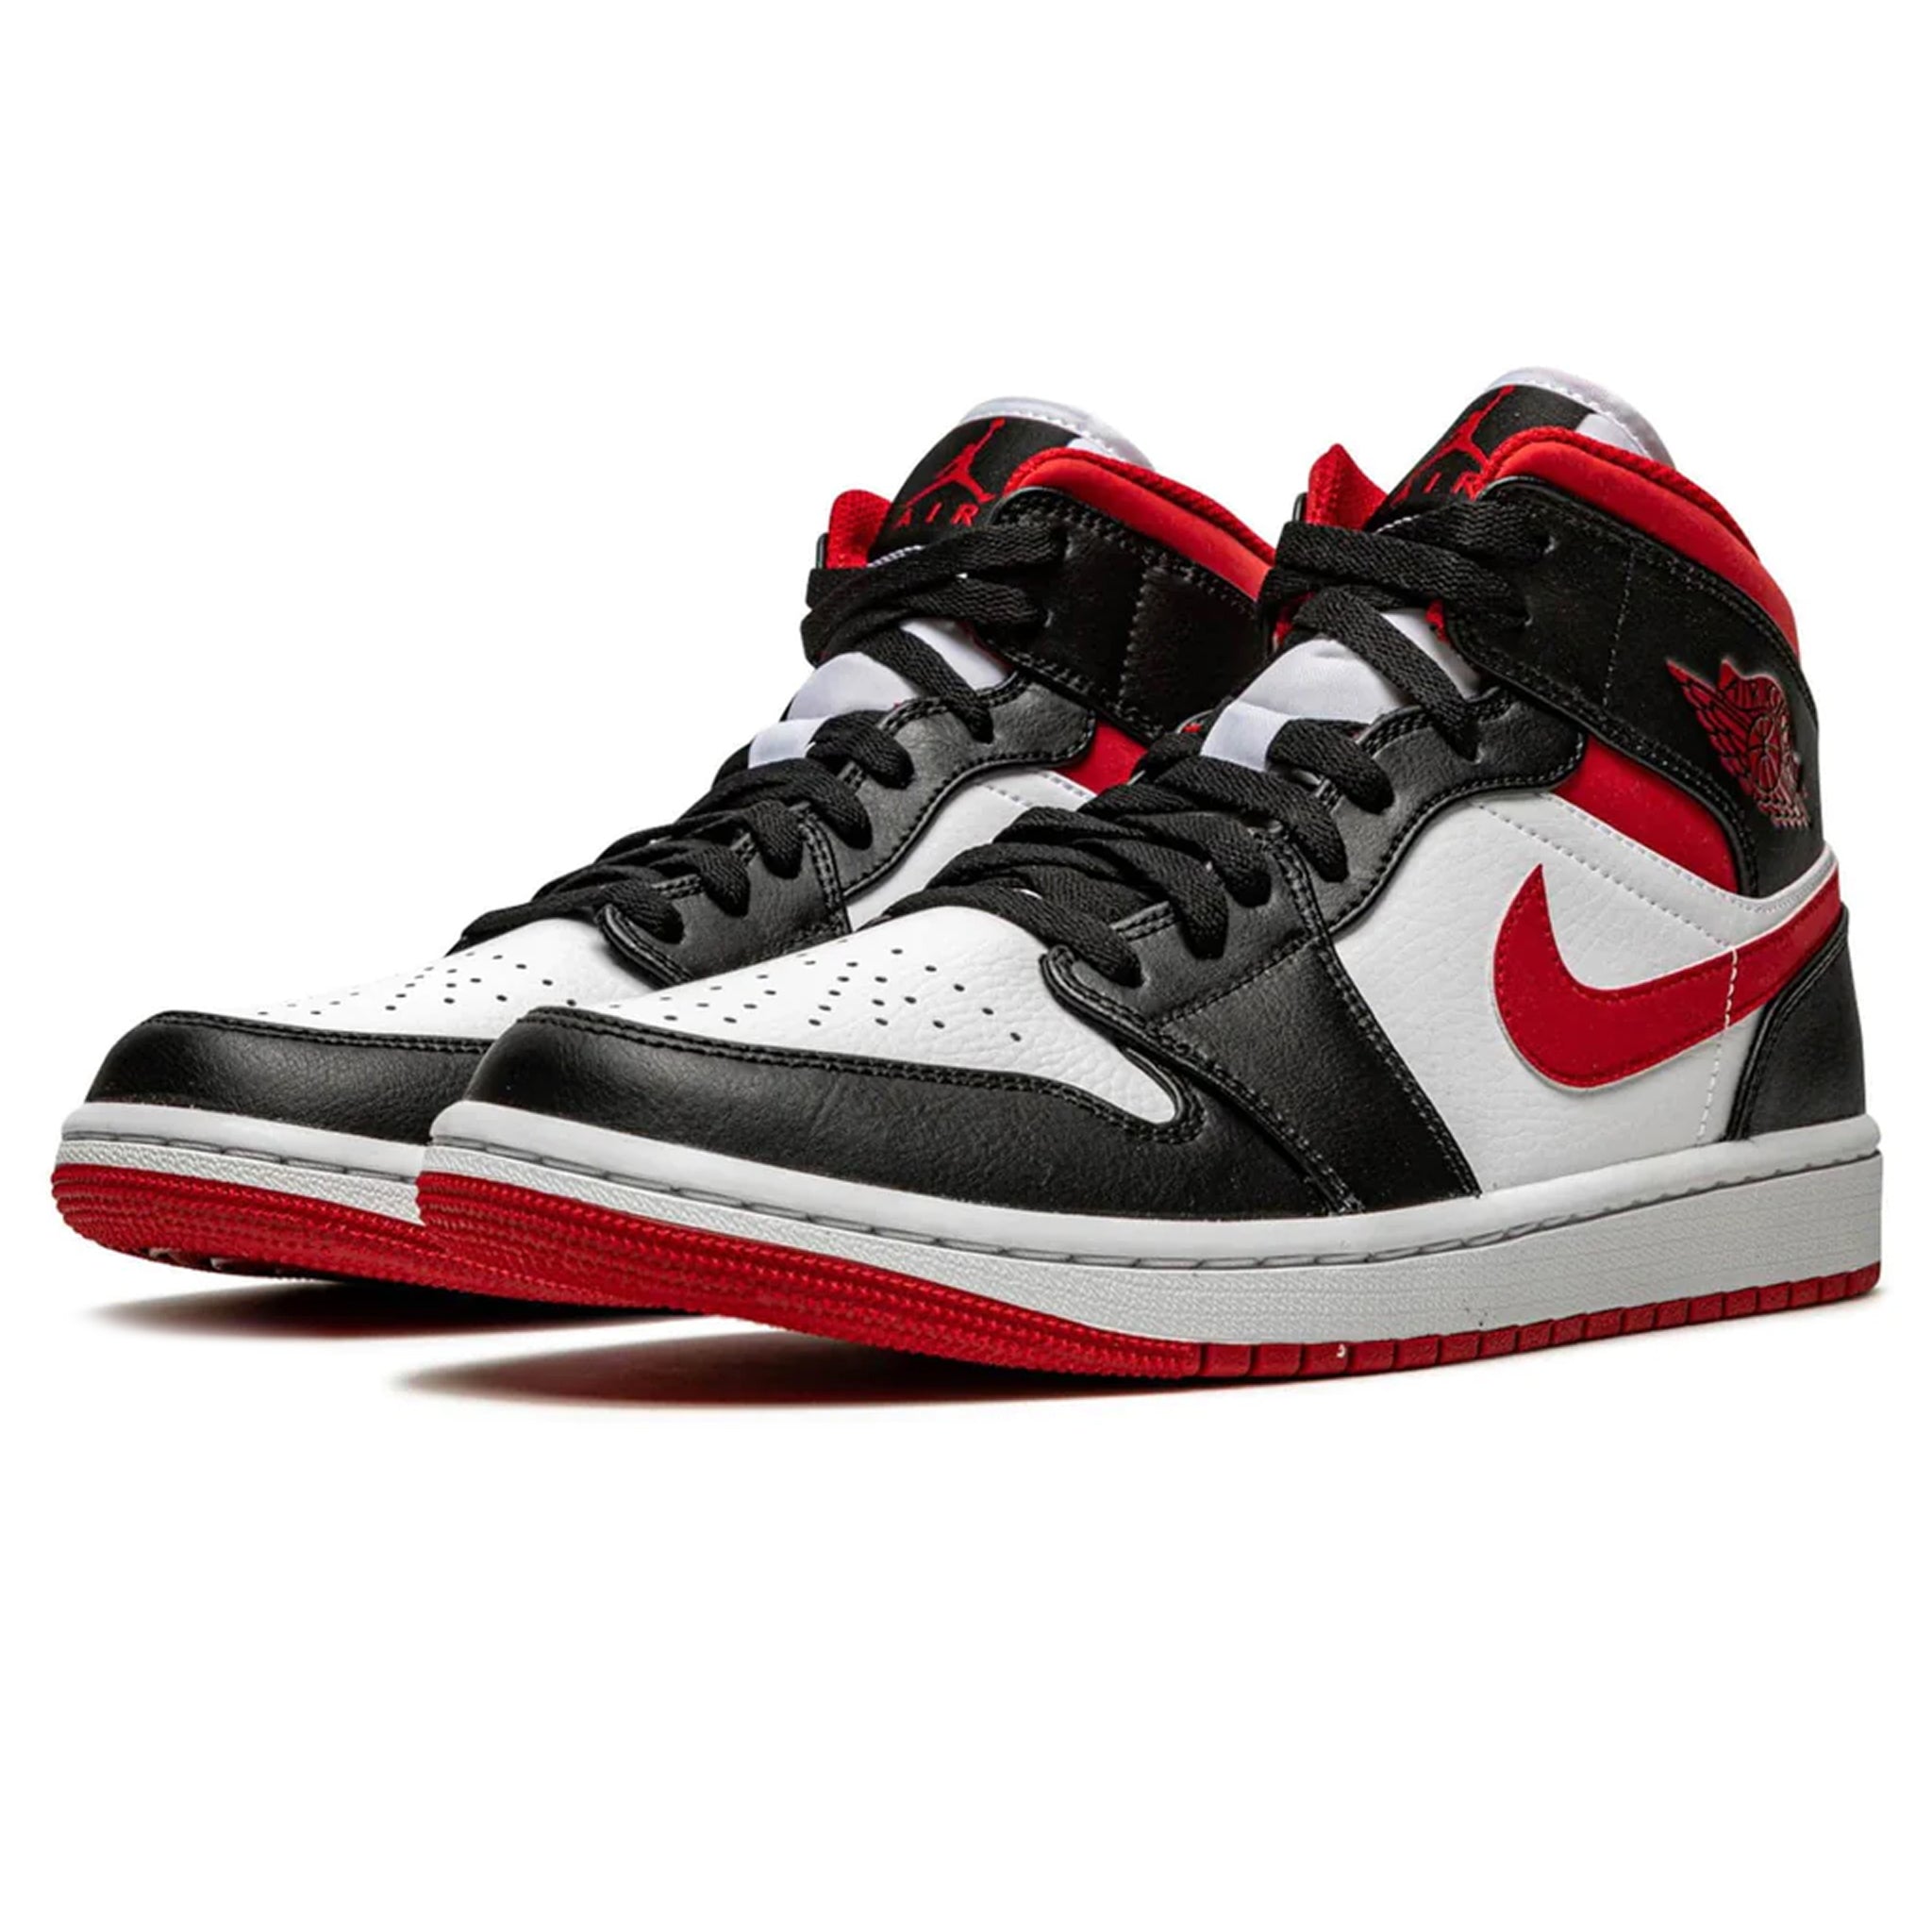 Front side view of Air Jordan 1 Mid Gym Red Black White 554724-122